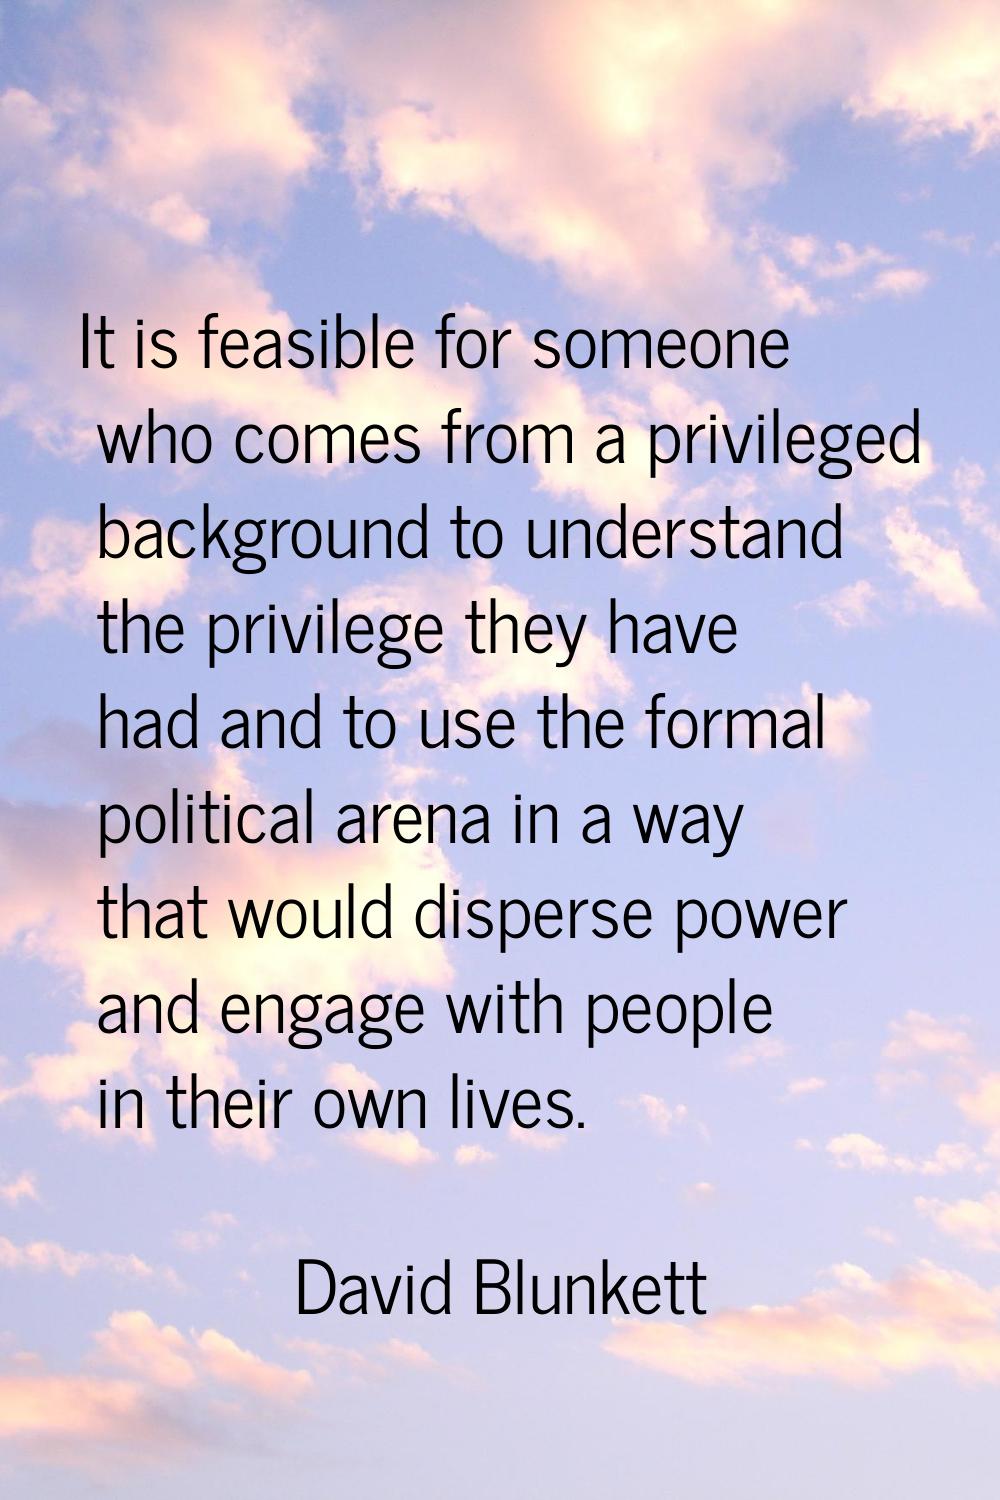 It is feasible for someone who comes from a privileged background to understand the privilege they 